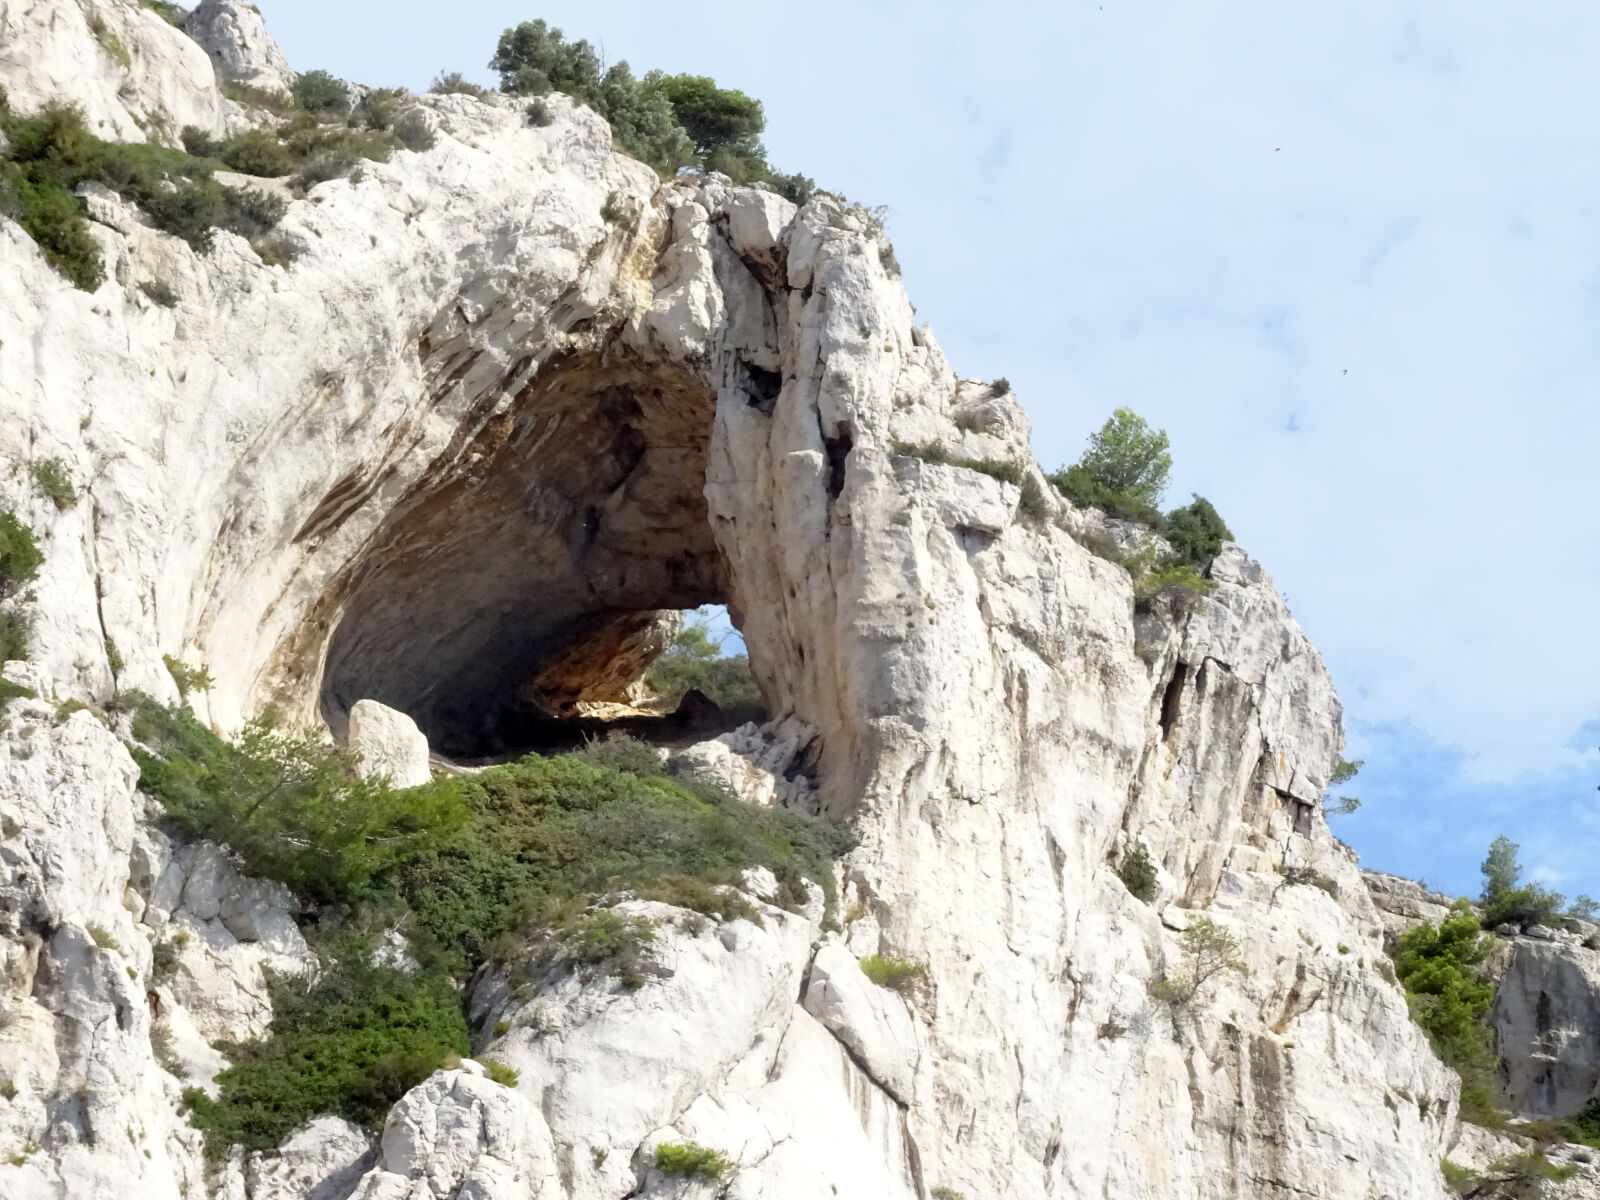 Sony DSC-HX60 sample photo. Calanque, cave photography